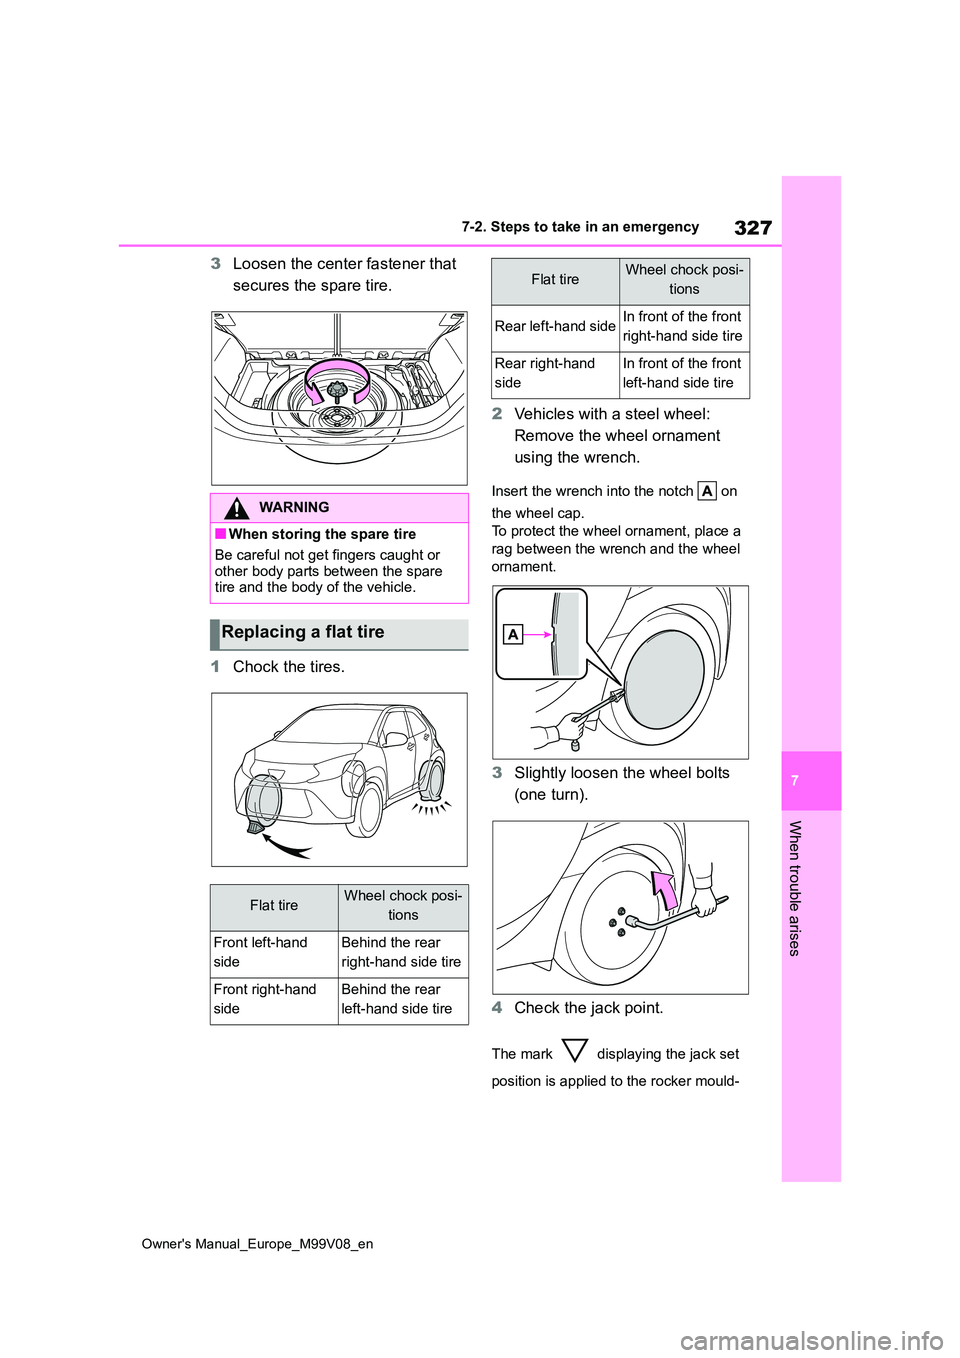 TOYOTA AYGO X 2022  Owners Manual (in English) 327
7
Owner's Manual_Europe_M99V08_en
7-2. Steps to take in an emergency
When trouble arises
3Loosen the center fastener that  
secures the spare tire. 
1 Chock the tires. 
2 Vehicles with a steel